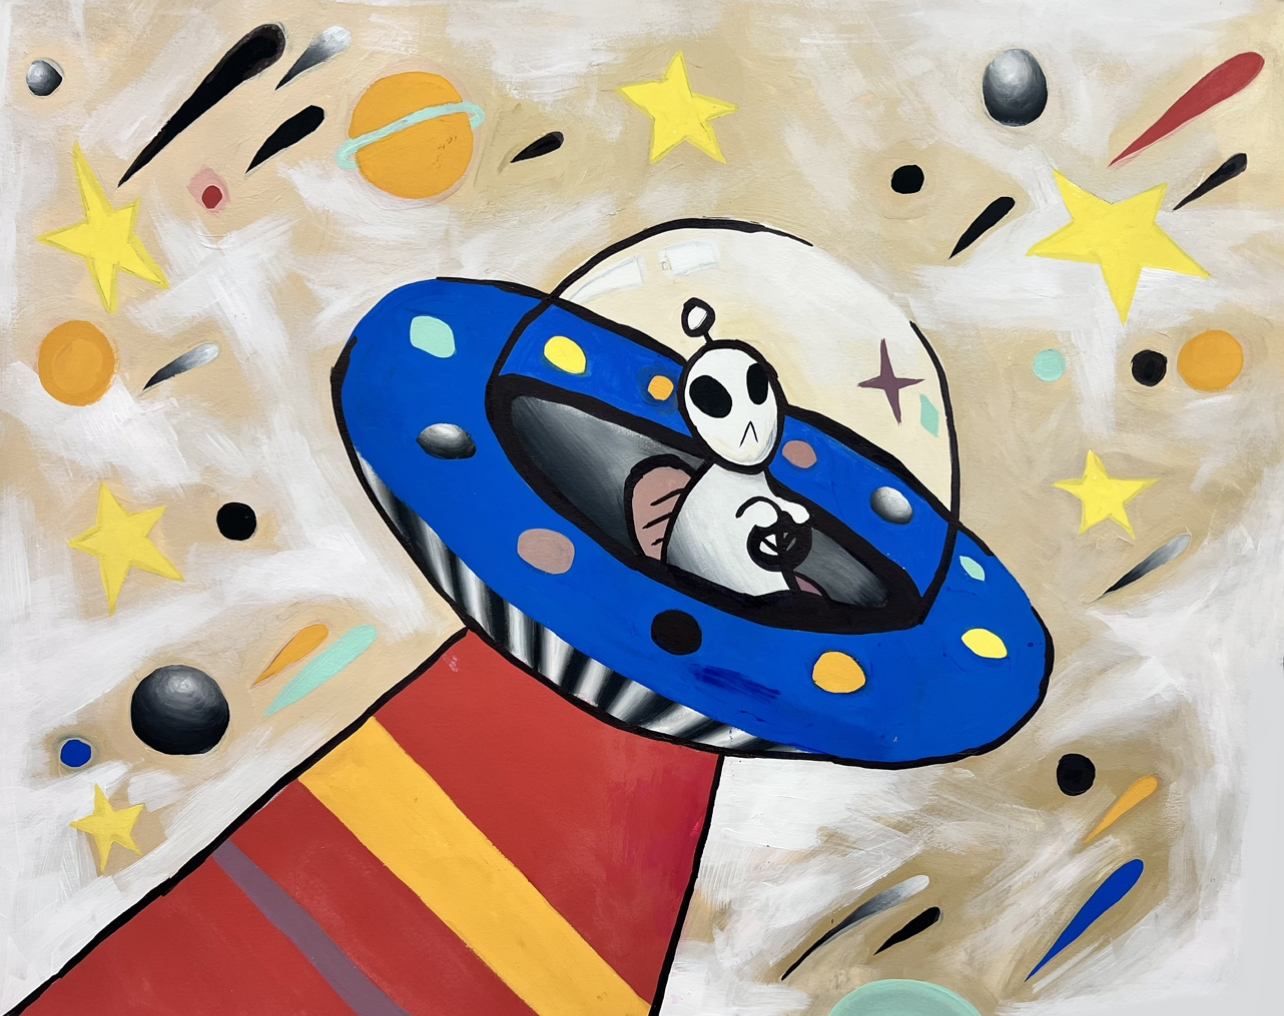 A gouache painting depicting an adorable bright-white alien in a flying saucer. The blue vessel is centered on the beige canvas, heading towards the upper right-hand side, shining down a red beam below it. In the background are yellow stars, black and red comets, orange orbs, teal stripes, whisps of white.